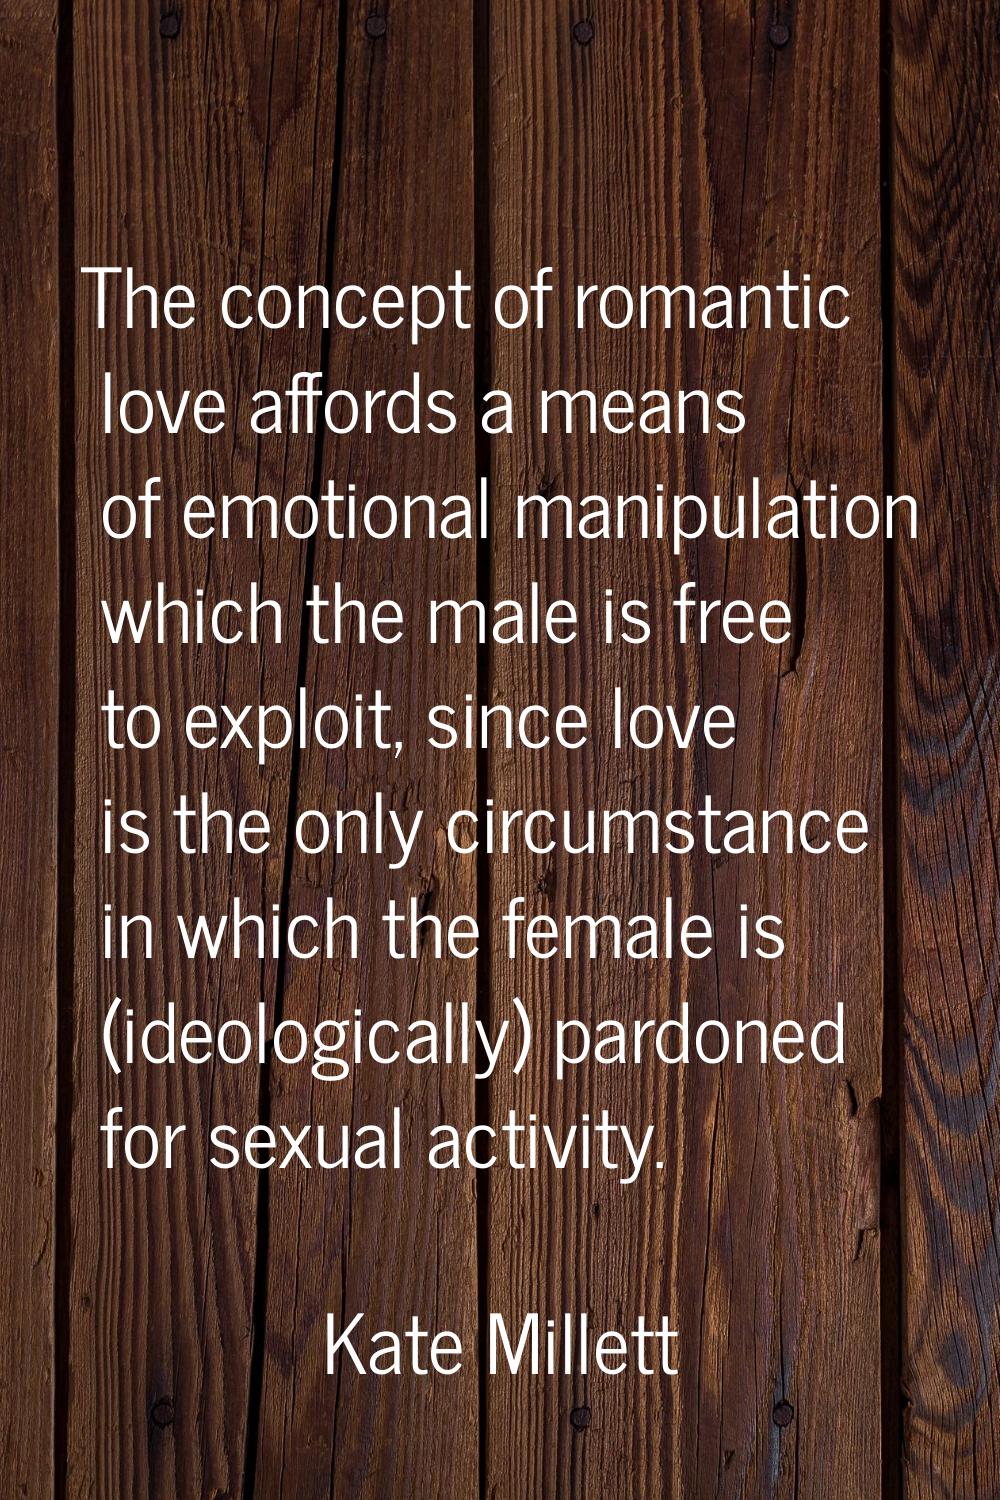 The concept of romantic love affords a means of emotional manipulation which the male is free to ex